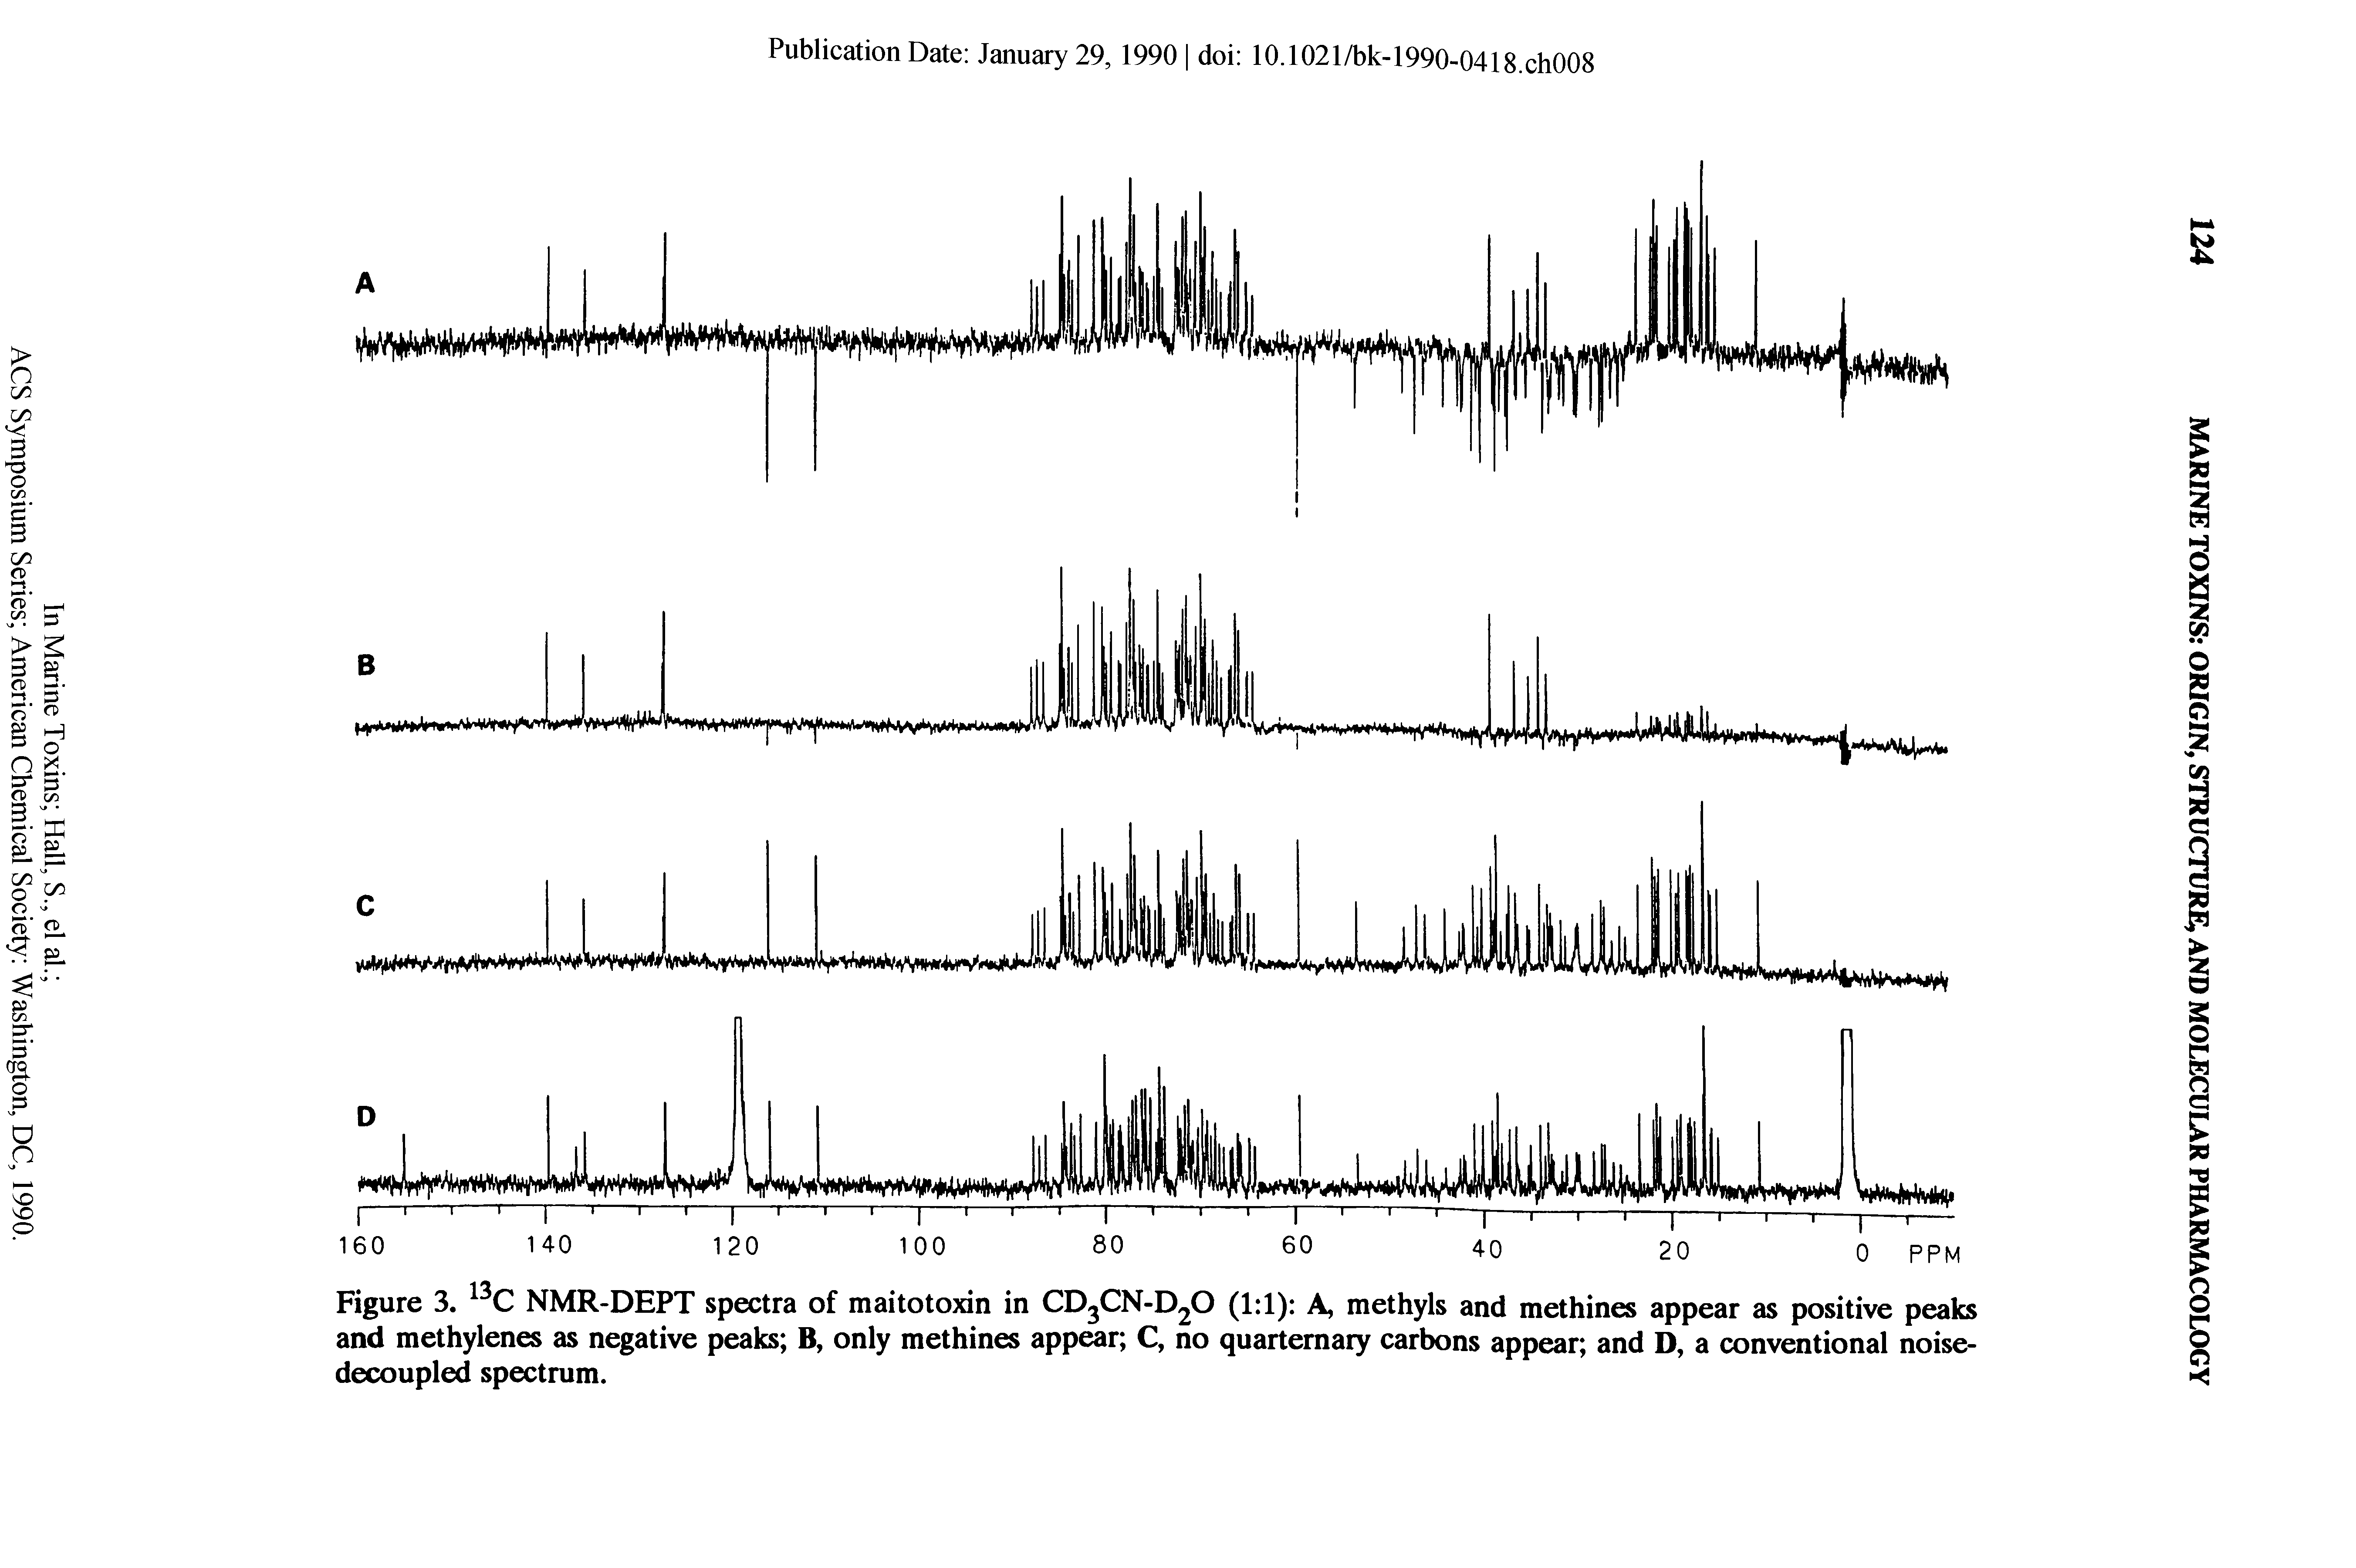 Figure 3. NMR-DEPT spectra of maitotoxin in CD3CN-D2O (1 1) A, methyls and methines appear as positive peaks and methylenes as negative peaks B, only methines appear C, no quarternary carbons appear and D, a conventional noise-decoupled spectrum.